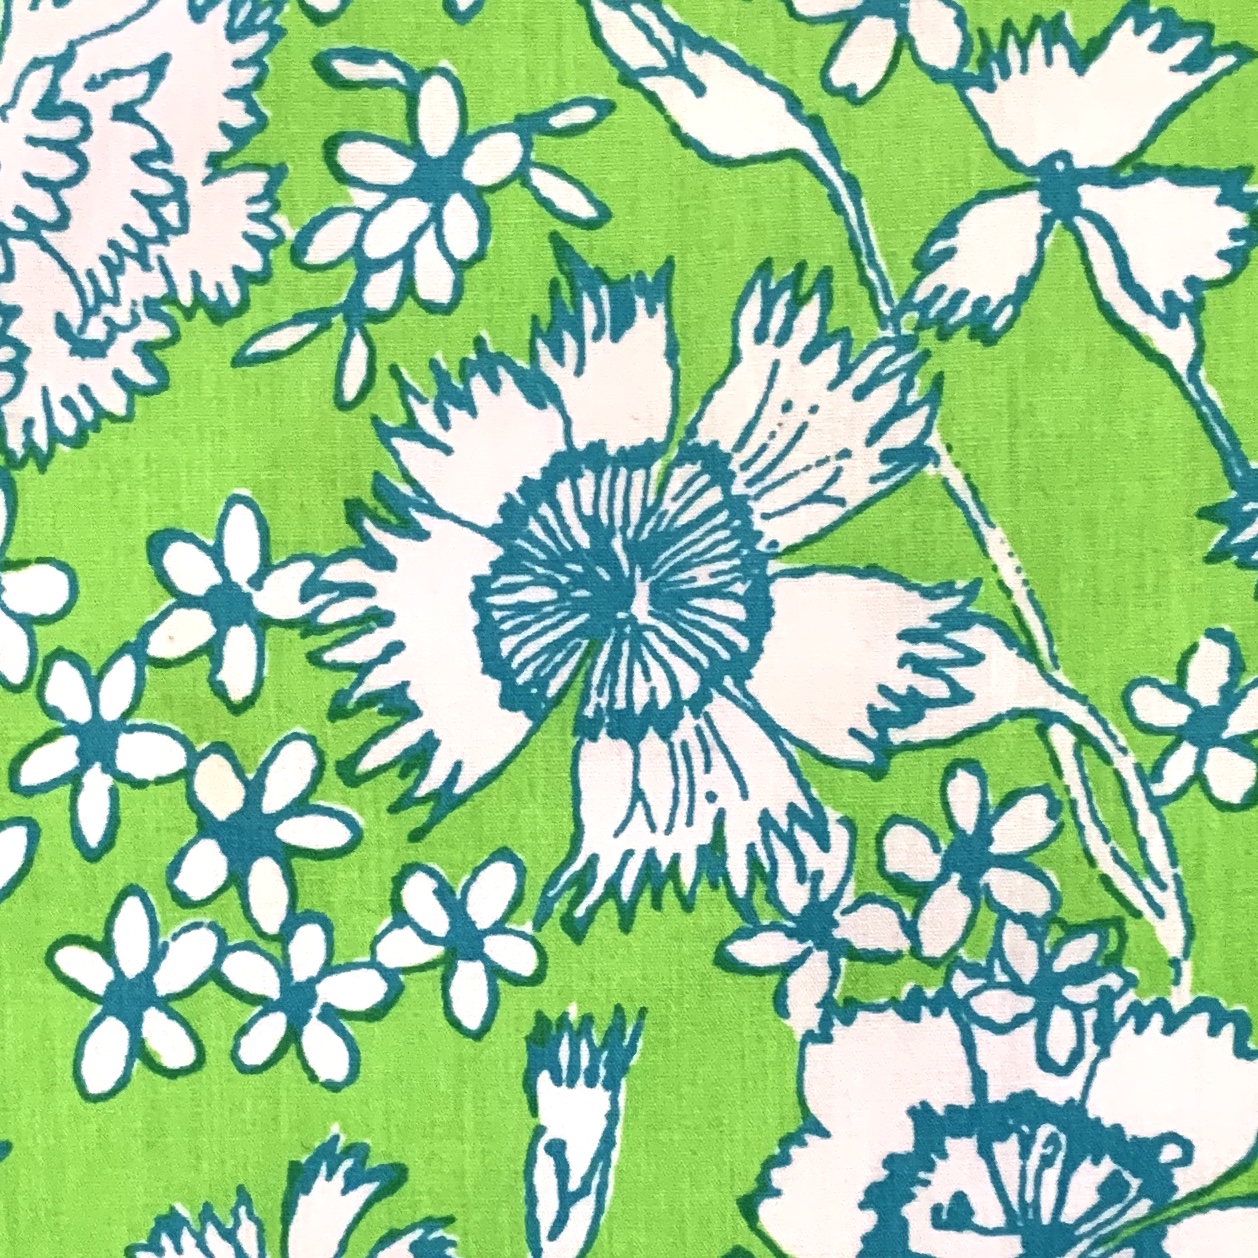 Vintage Lilly Pulitzer green & blue floral maxi dress, detail